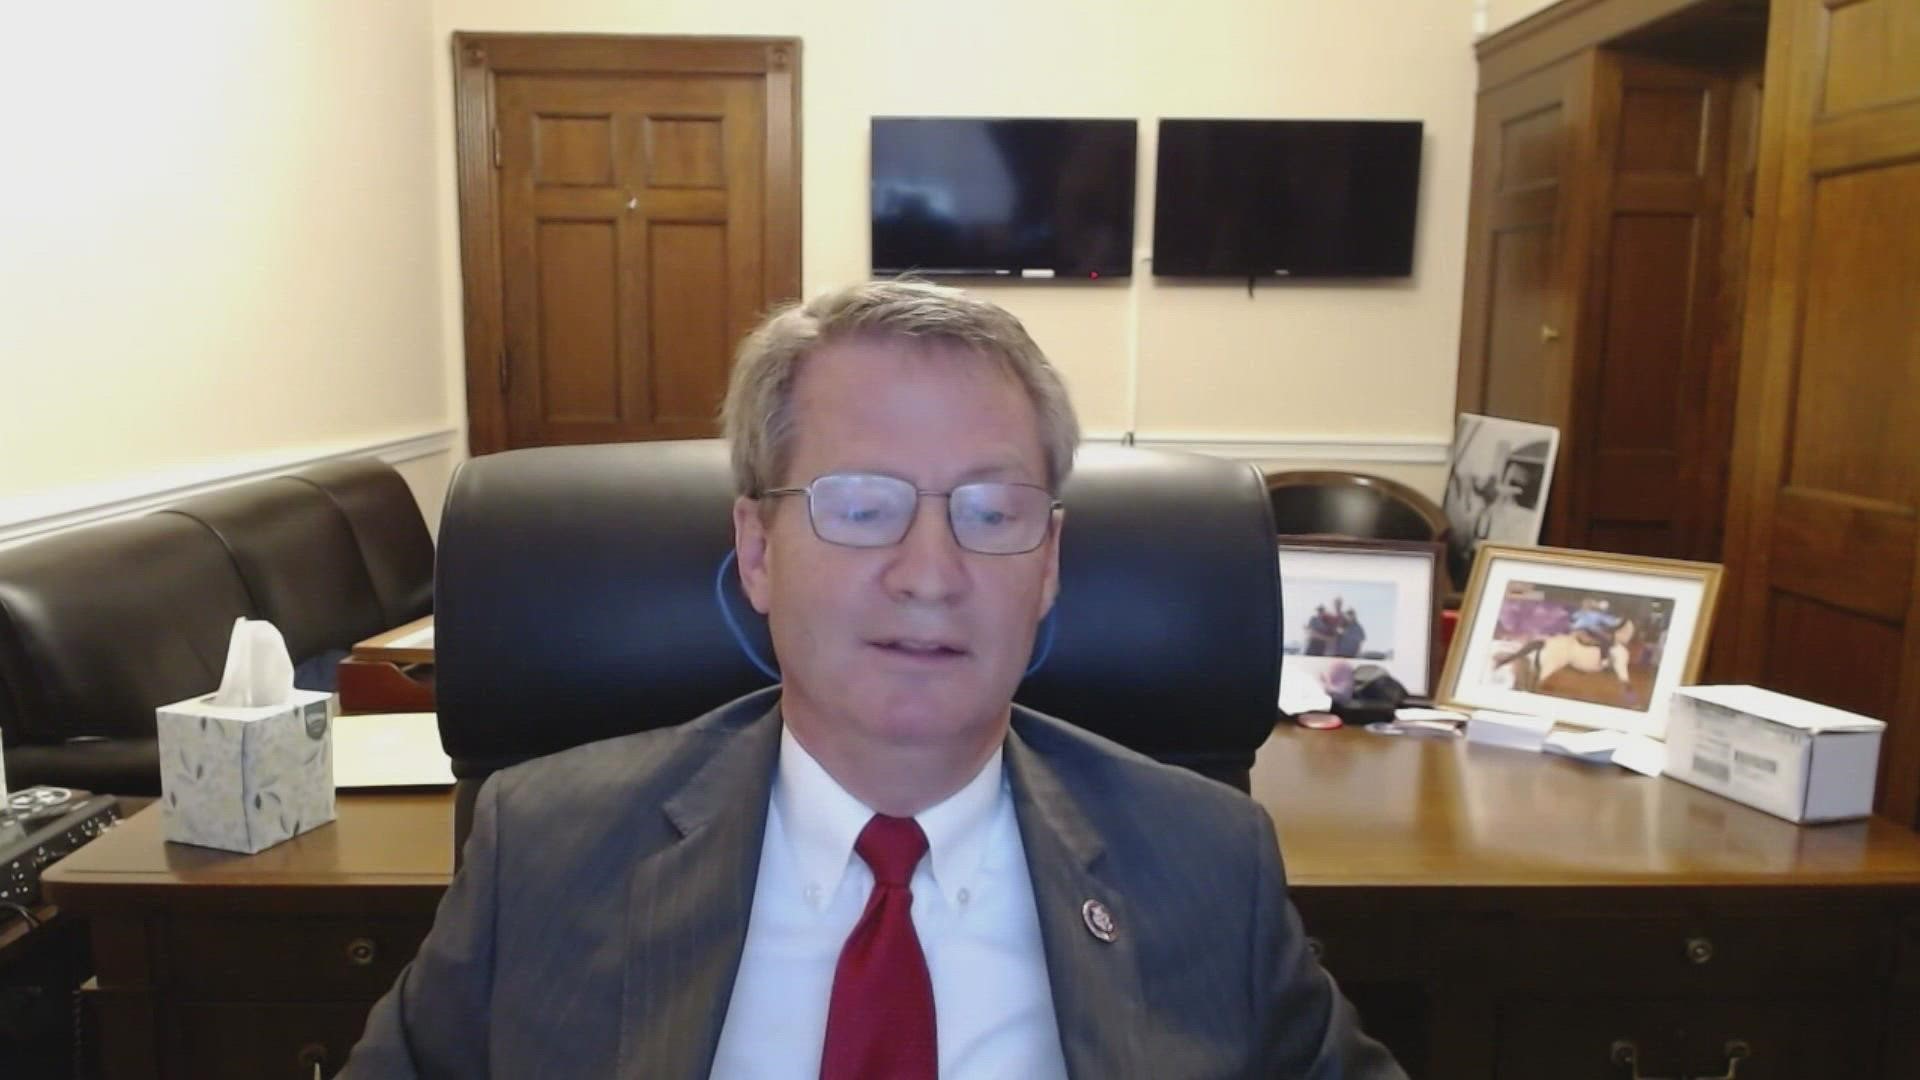 Burchett said he believed grandfathering the rule into place is the only way for it to work, so current members of Congress would not have a term limit.